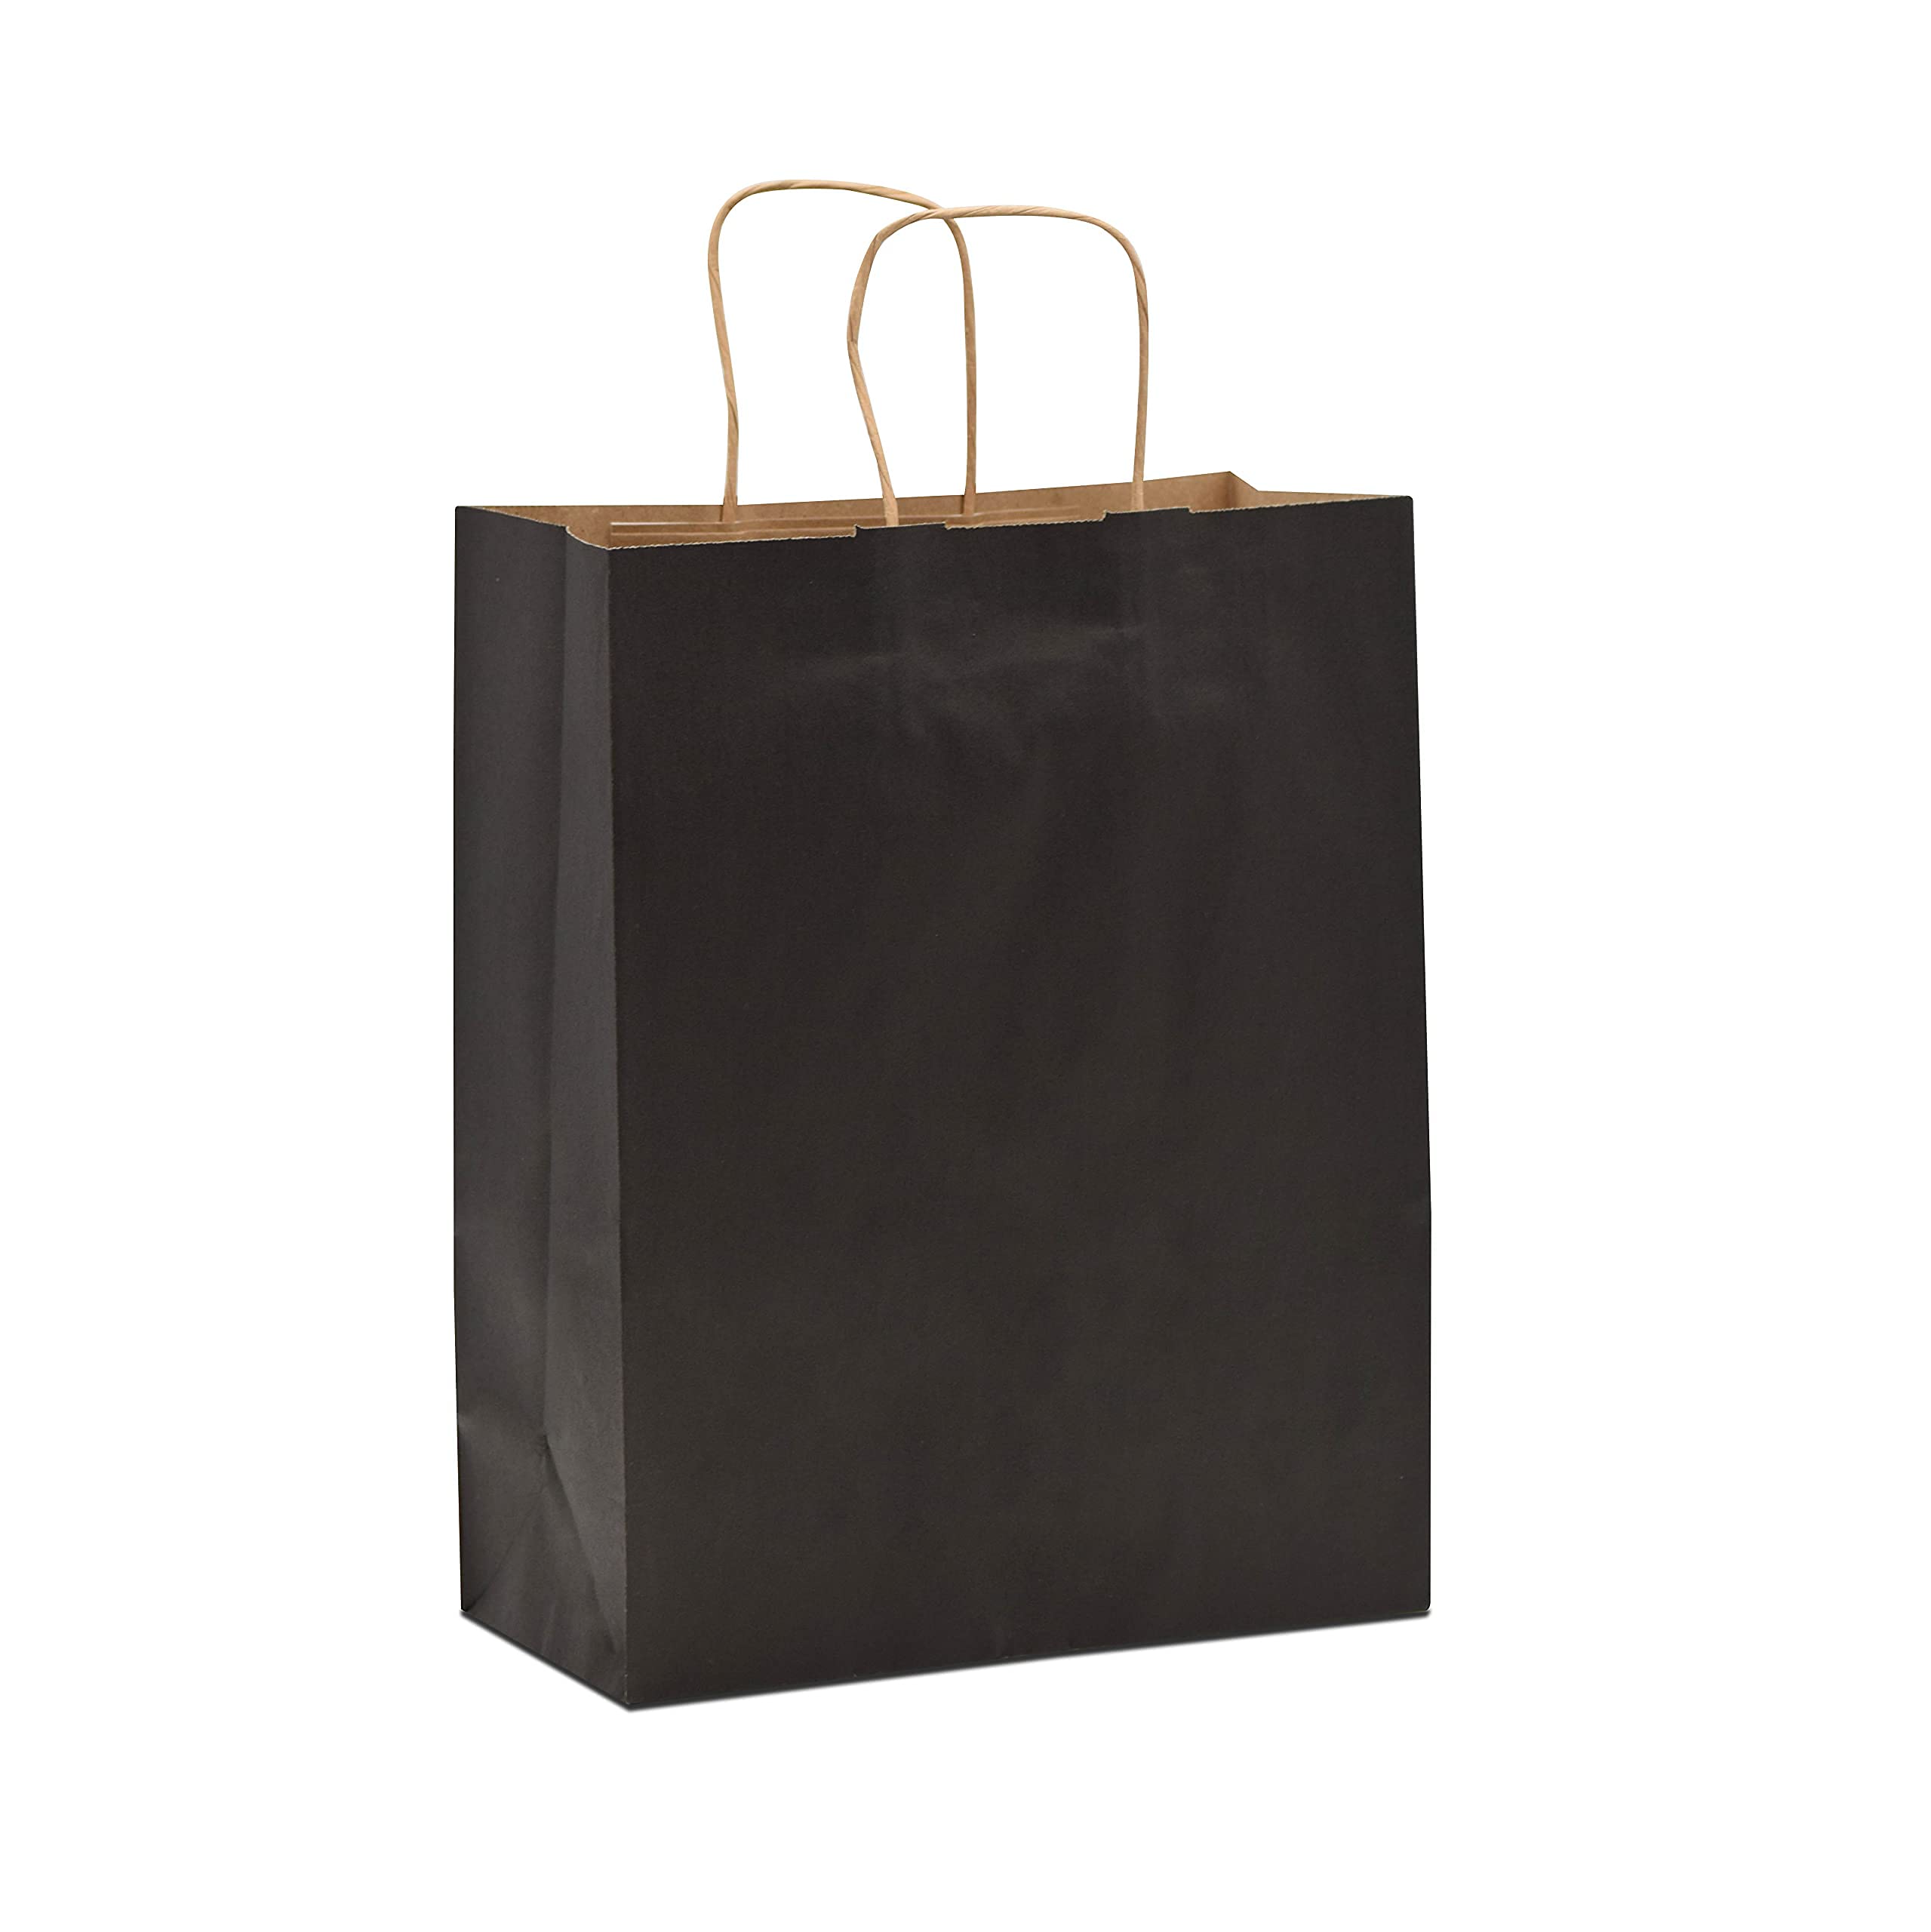 Black Gift Bags with Handles - 10x5x13 Inch 100 Pack Medium Kraft Paper Shopping Bags, Craft Totes in Bulk for Boutiques, Small Business, Retail Stores, Birthdays, Party Favors, Jewelry, Merchandise  - Like New